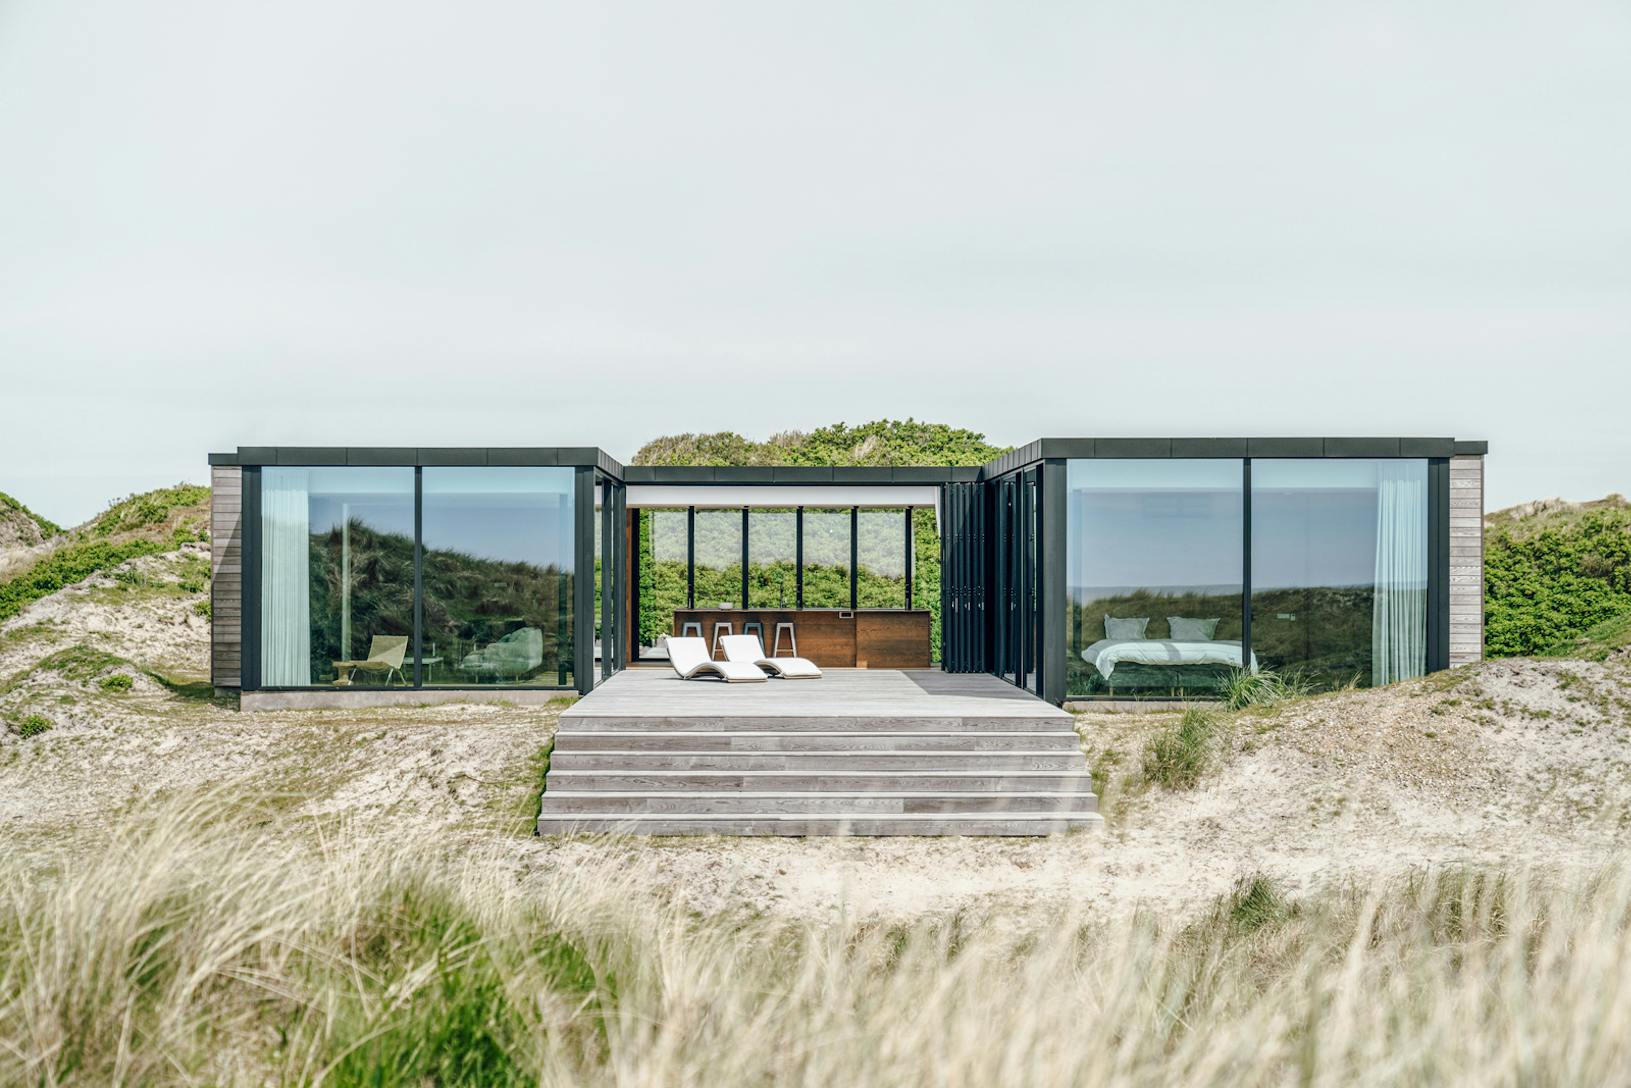 House in the dunes facing the ocean with floor to ceiling glass walls